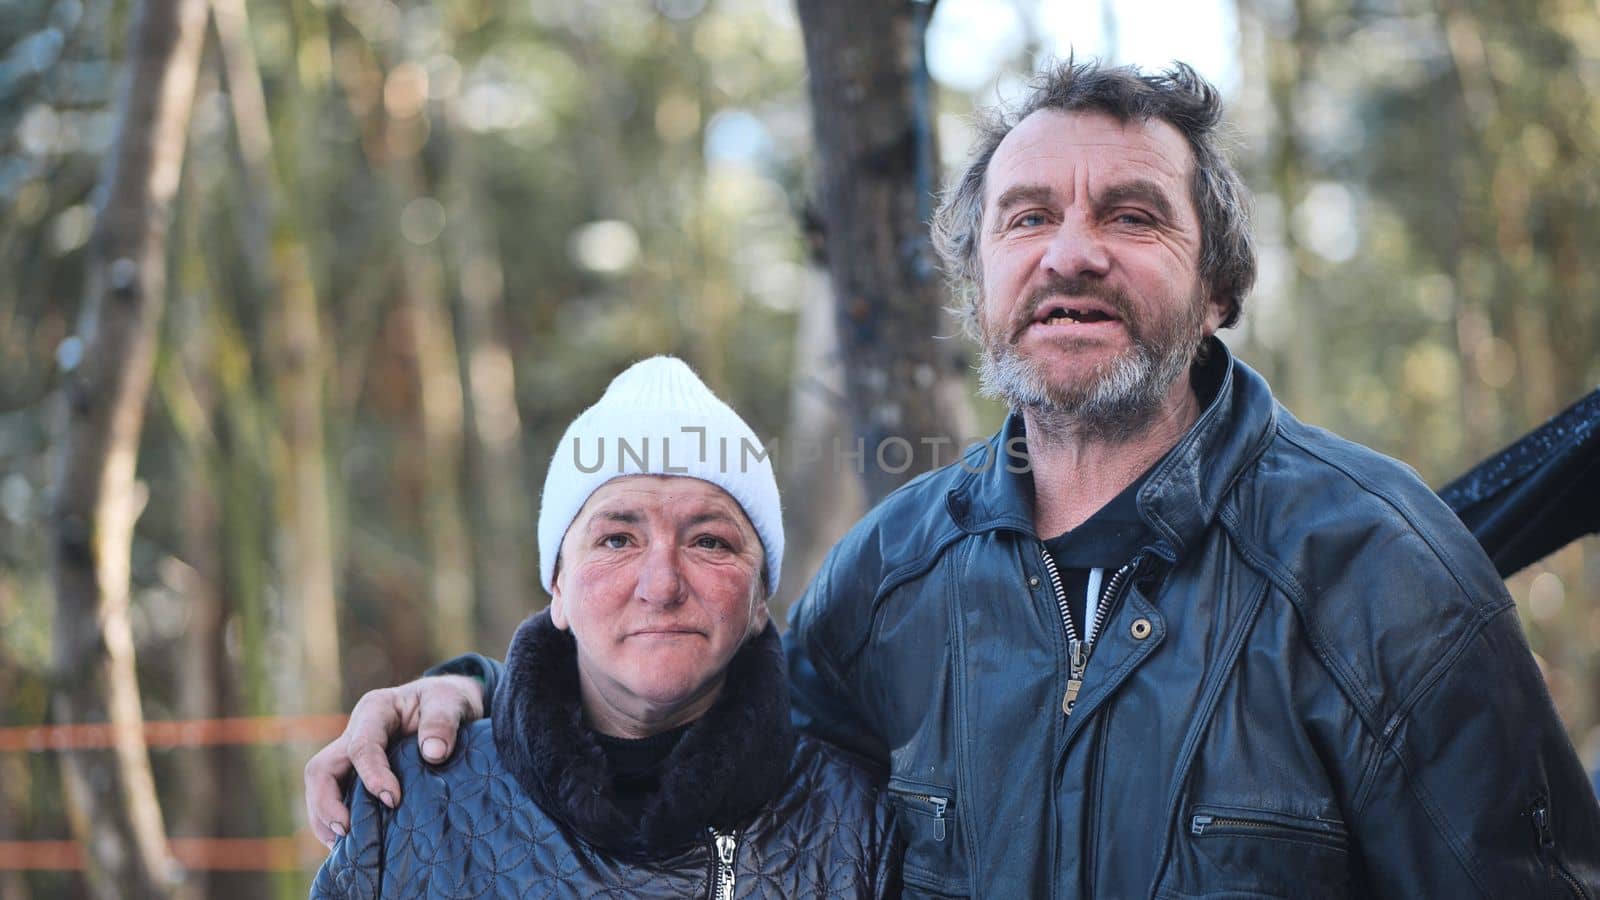 Homeless people are interviewed in the winter in the woods